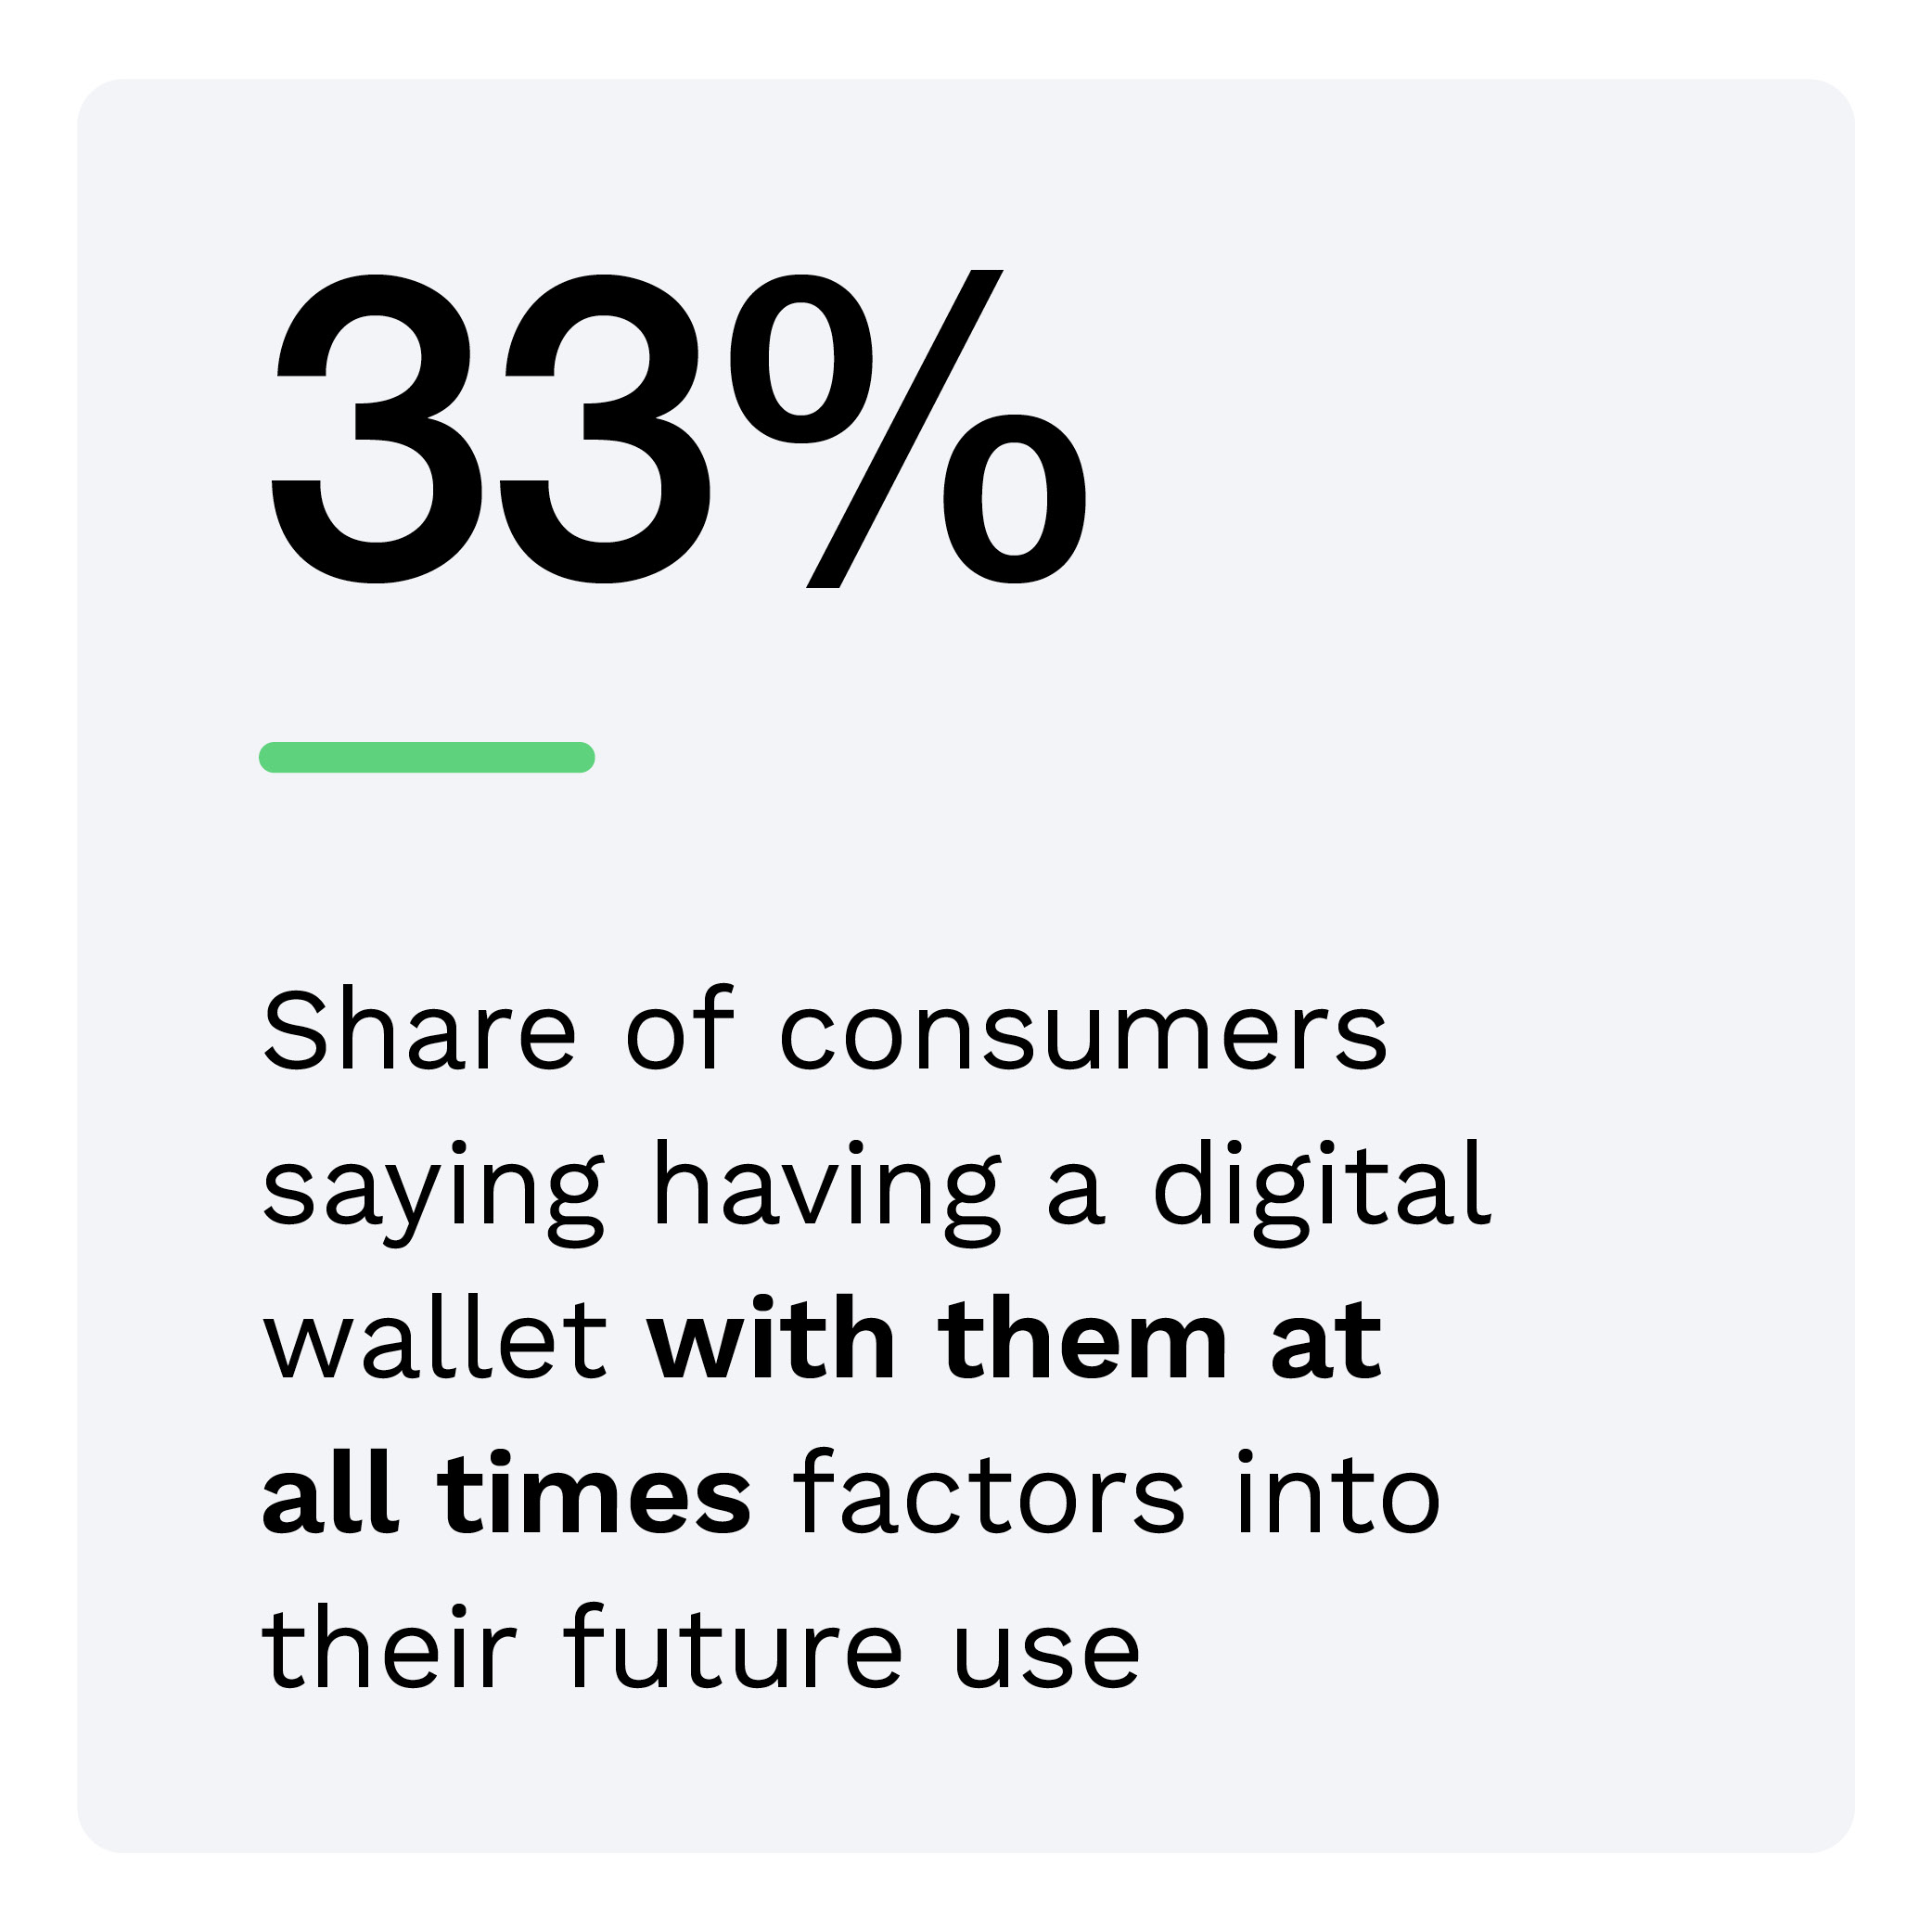 33%: Share of consumers saying having a digital wallet with them at all times factors into their future use